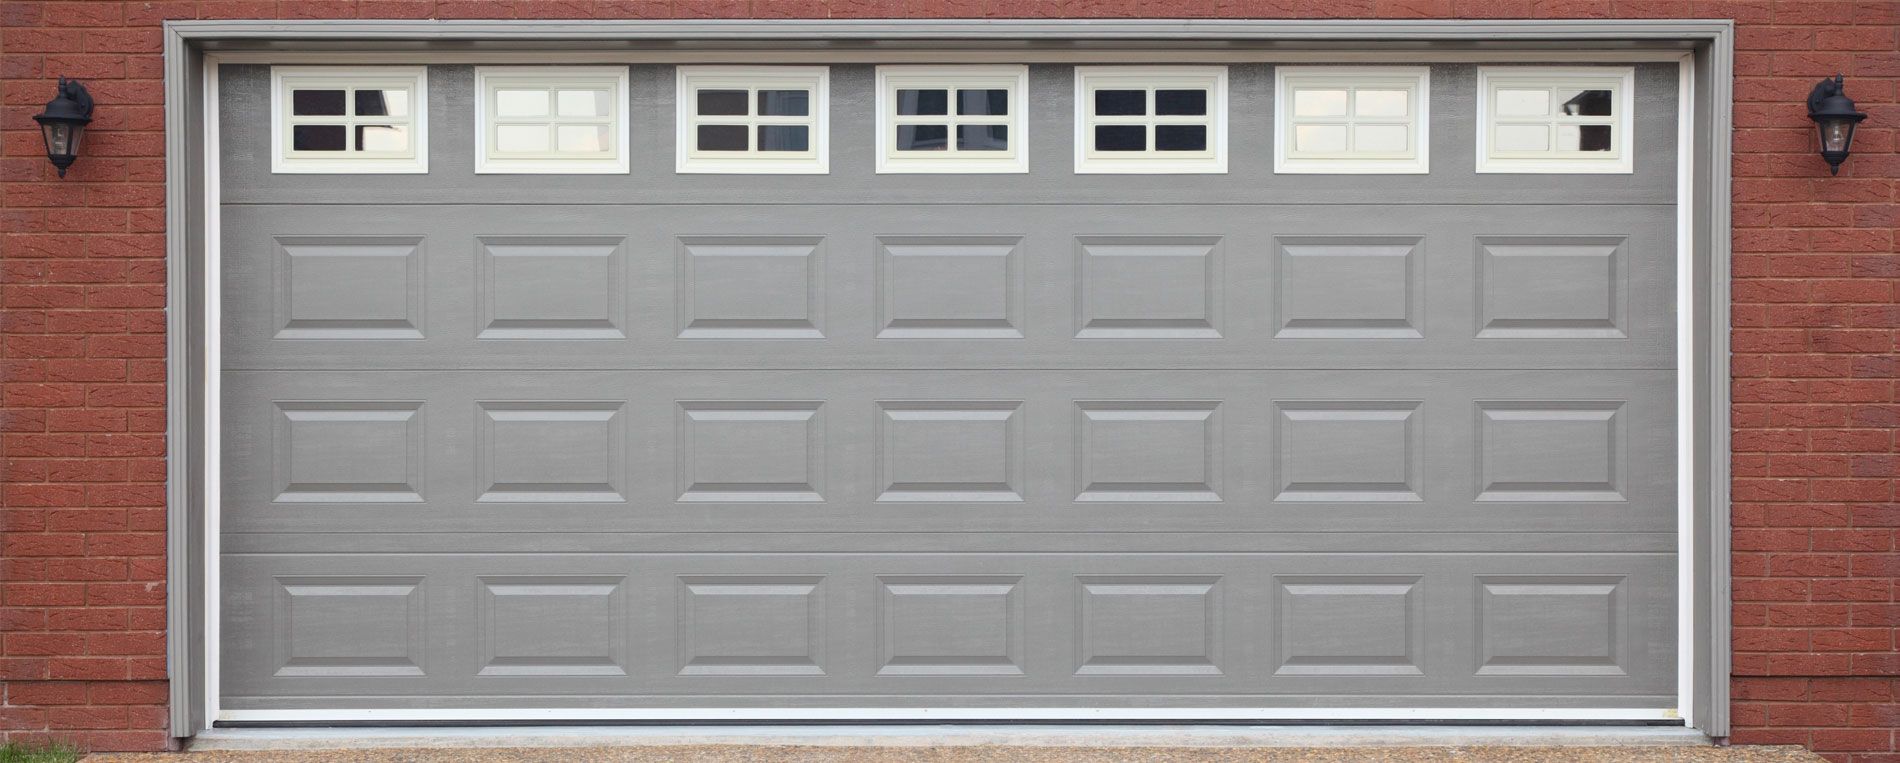 Cable Replacement For Garage Door In Troutdale